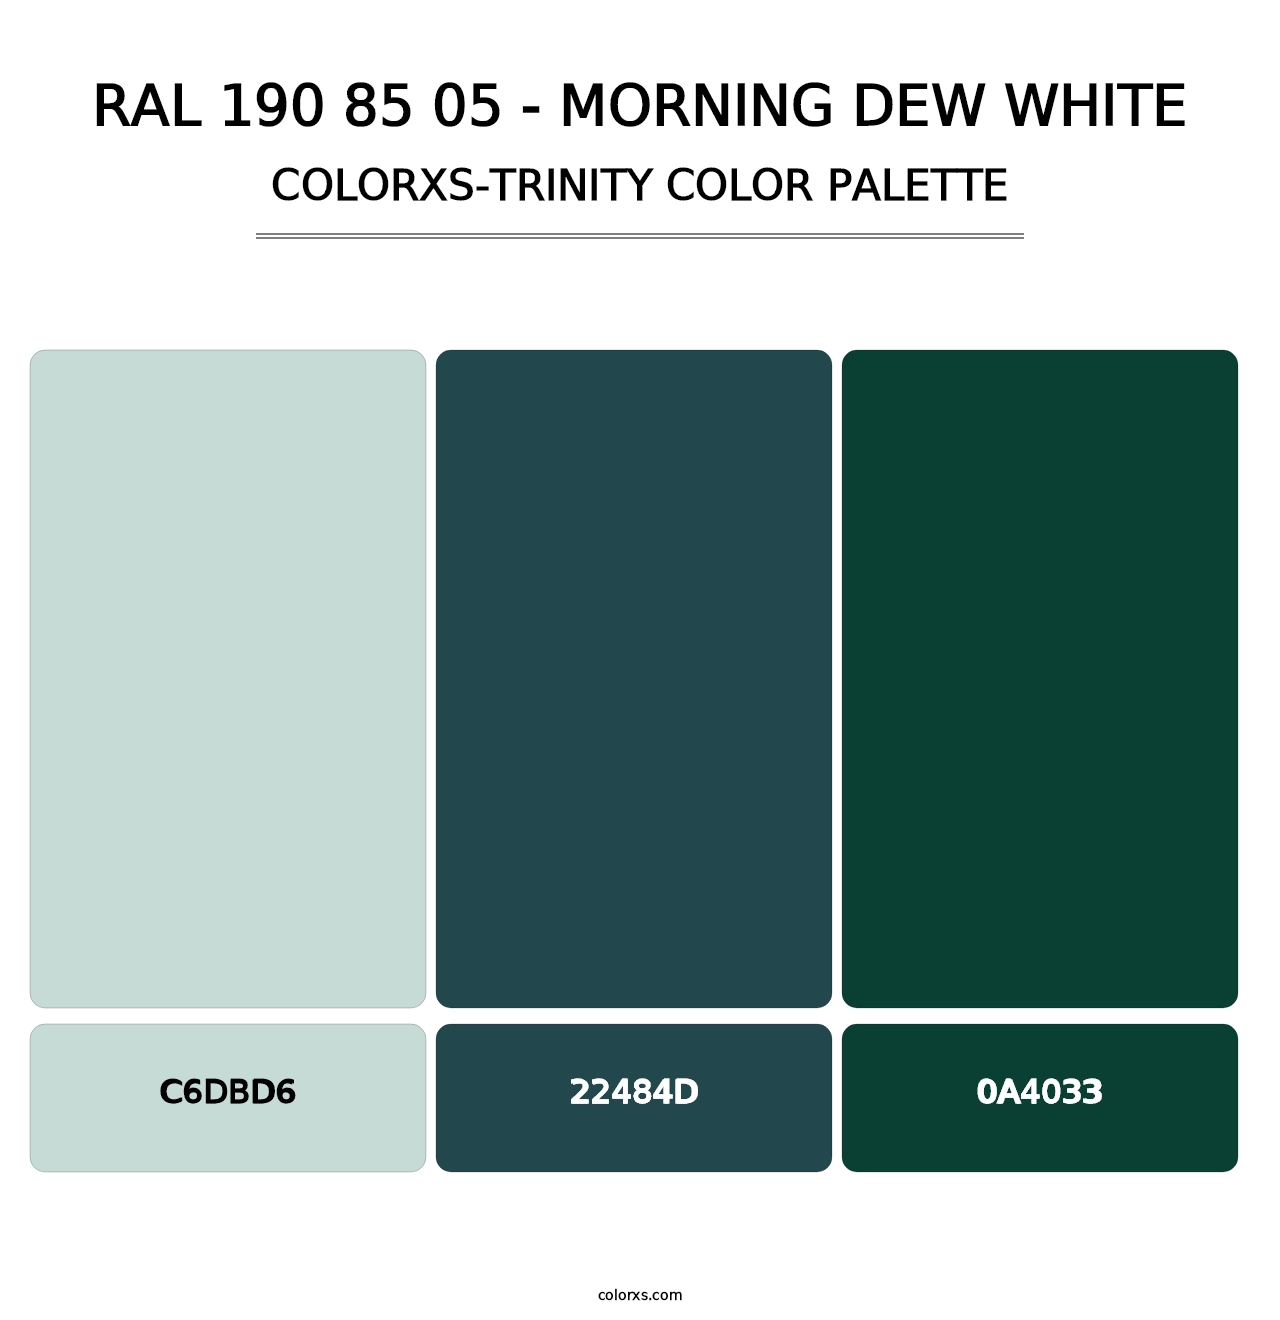 RAL 190 85 05 - Morning Dew White - Colorxs Trinity Palette